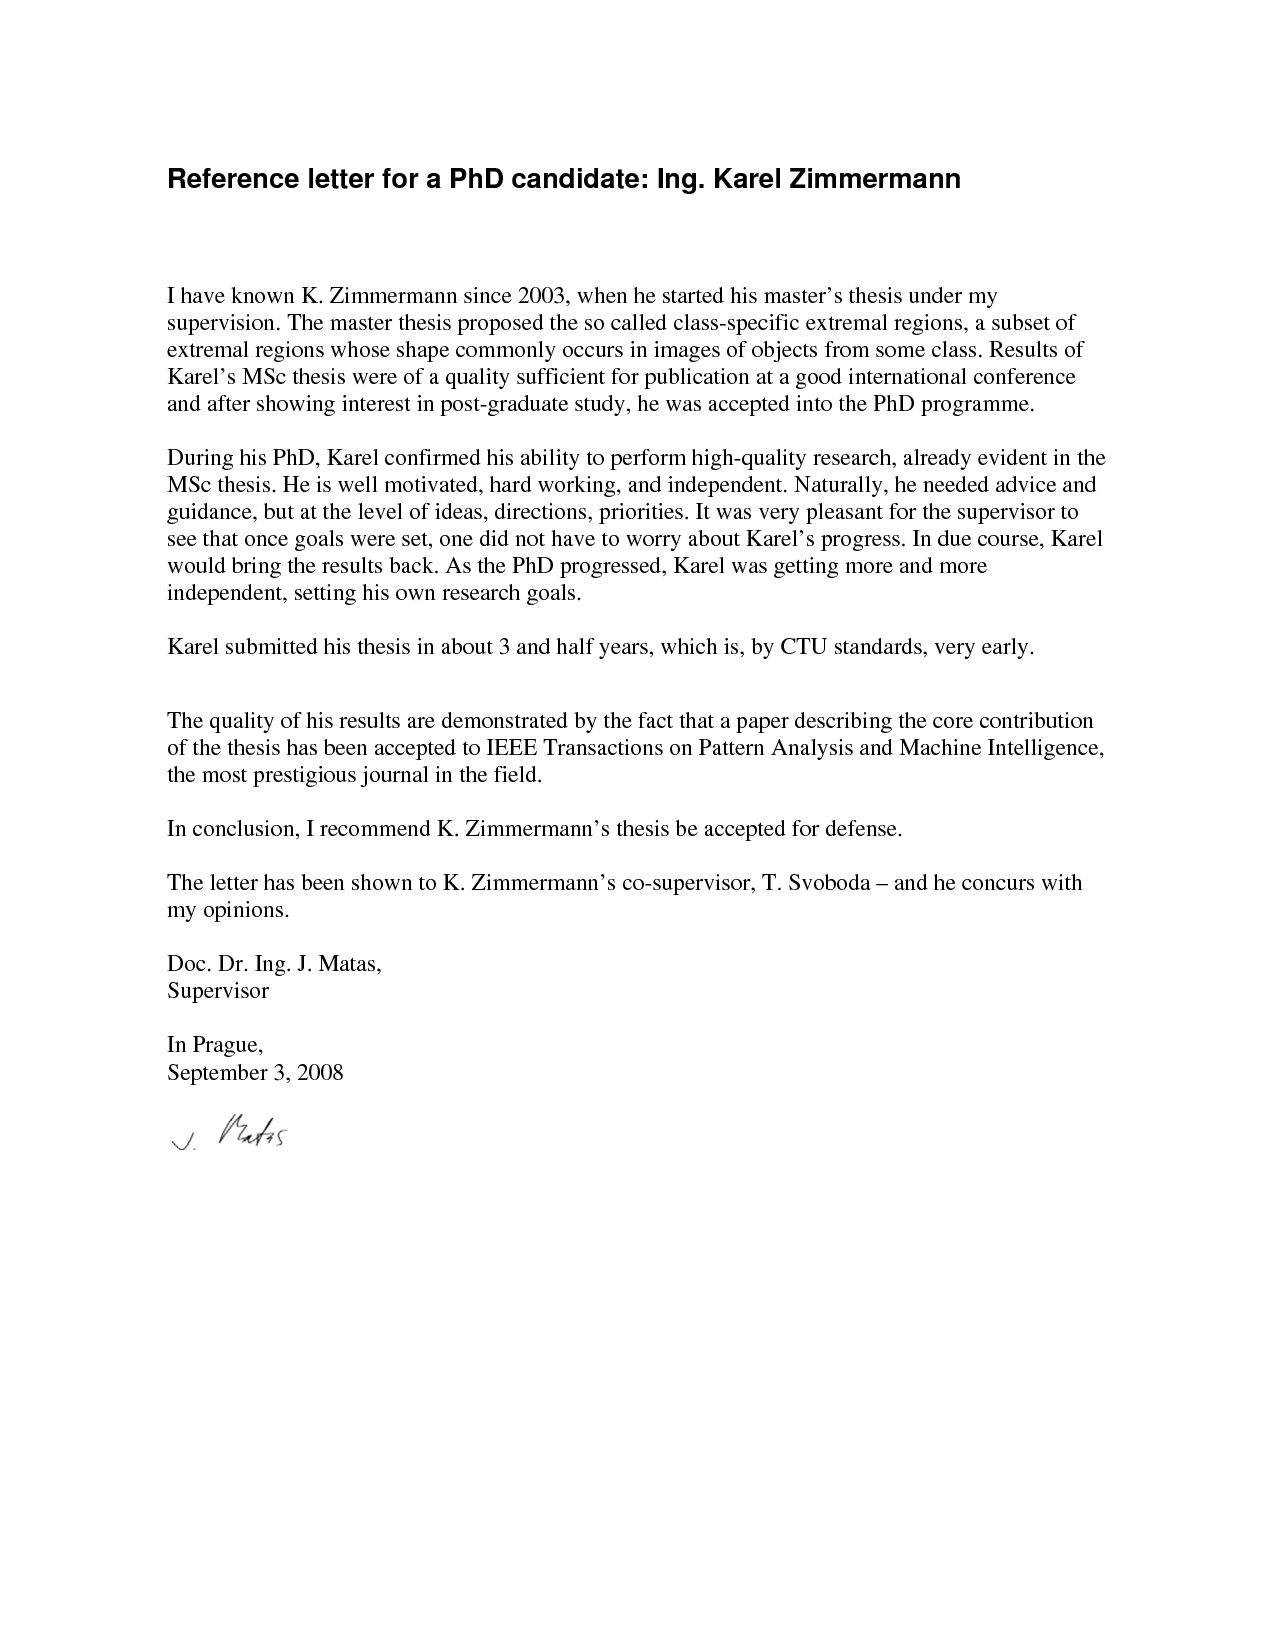 Recommendation Letter Phd Program Sample within dimensions 1275 X 1650